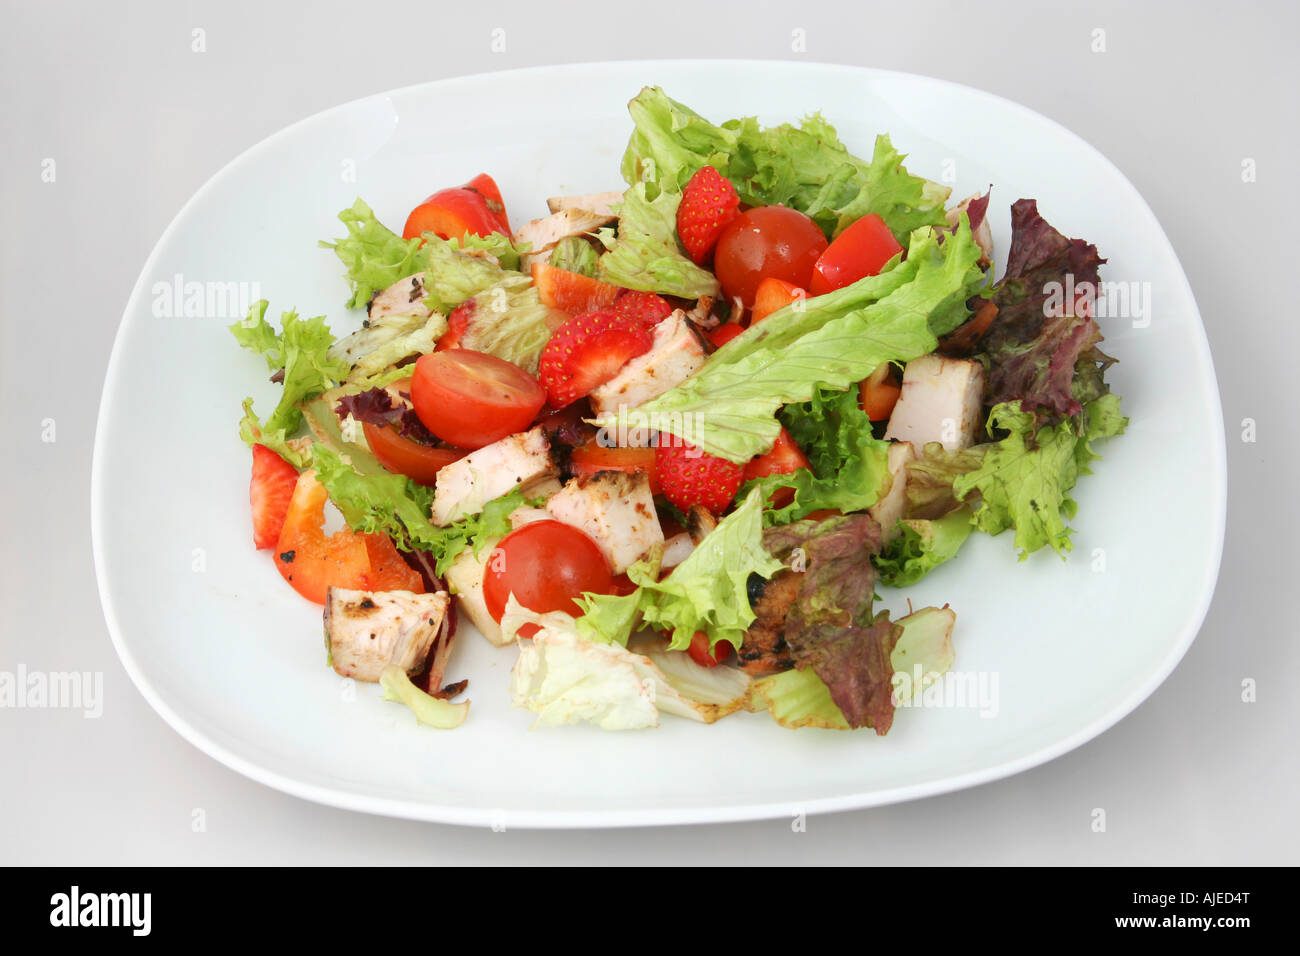 a dish of ready to eat chicken salad Stock Photo